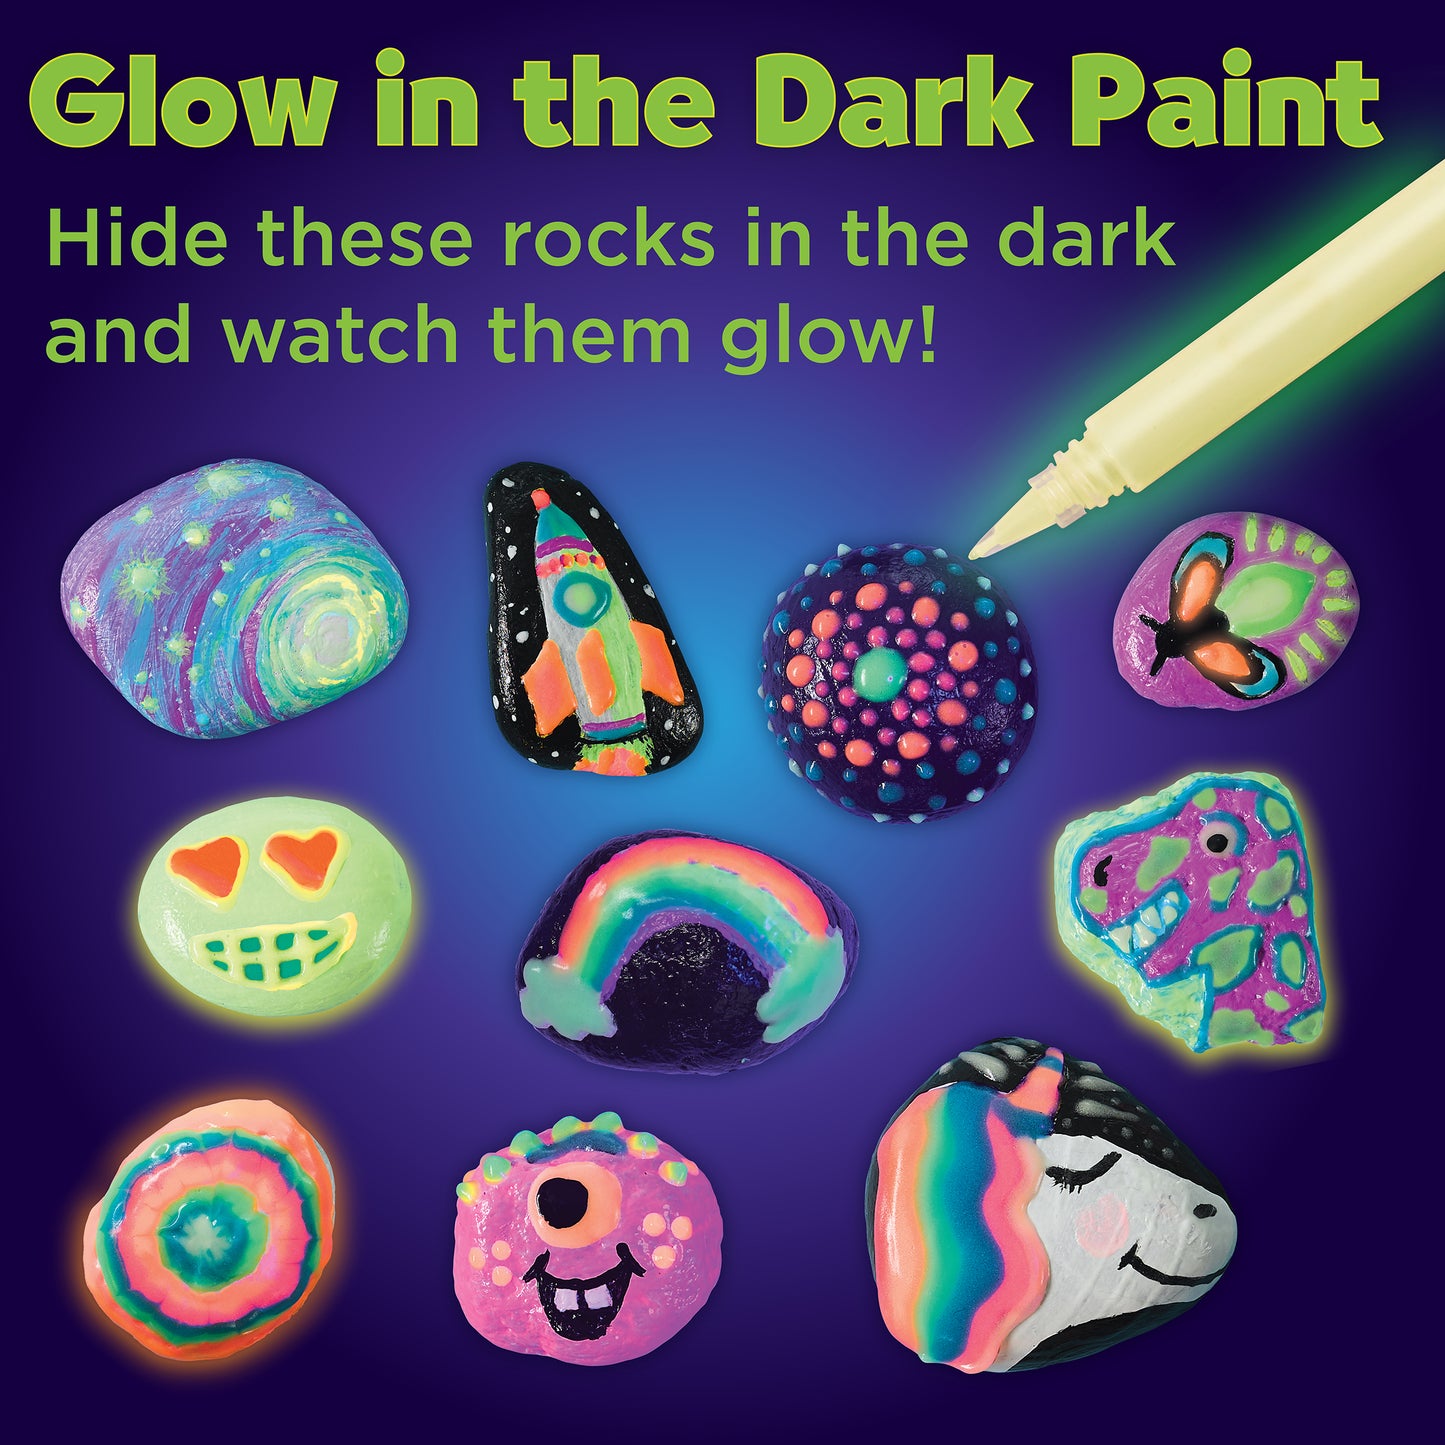 glow in the dark paint in rock painting kit